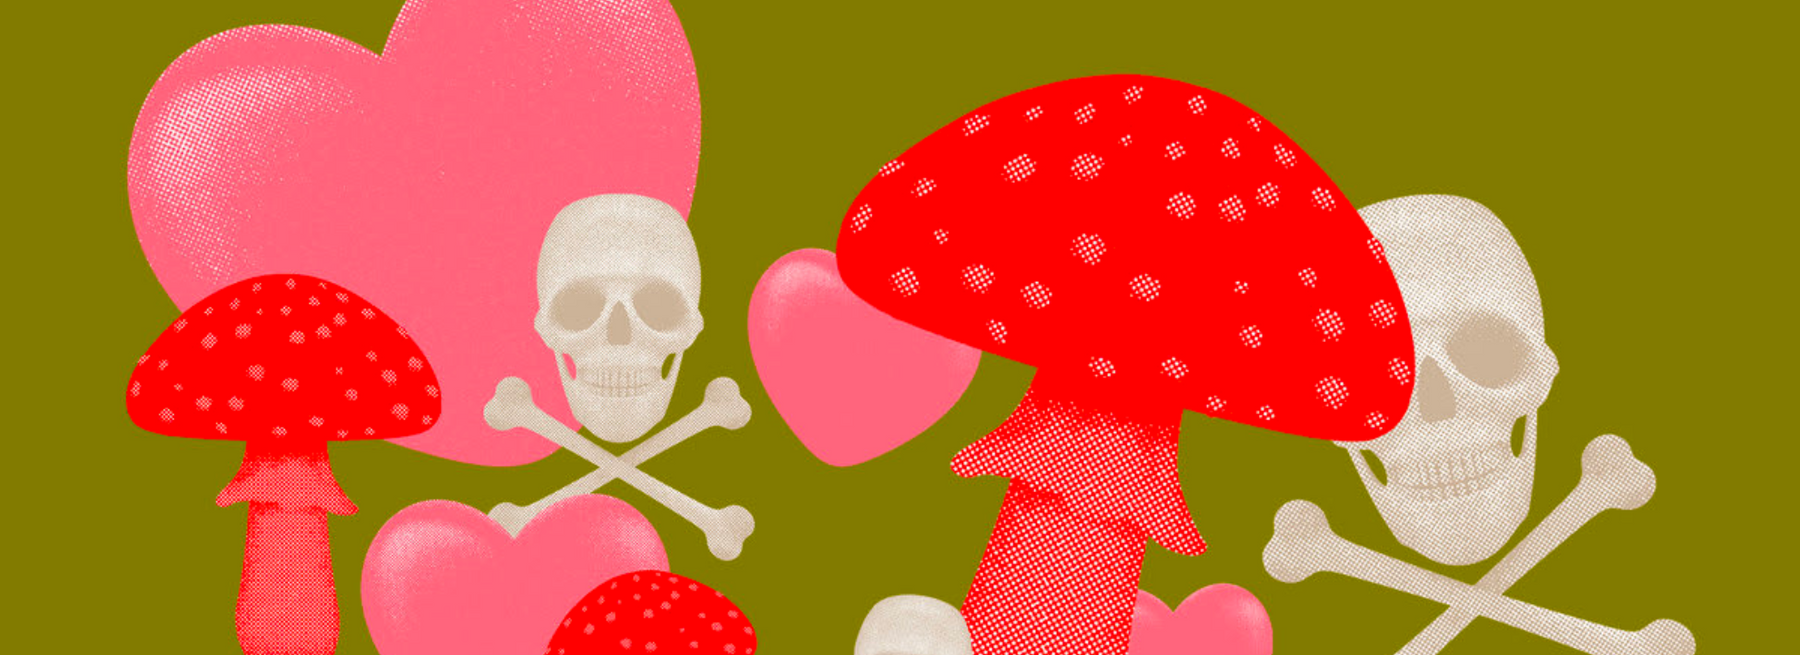 Does Taking Amanita Muscaria Mushrooms Come with Any Benefits and/or Side Effects?